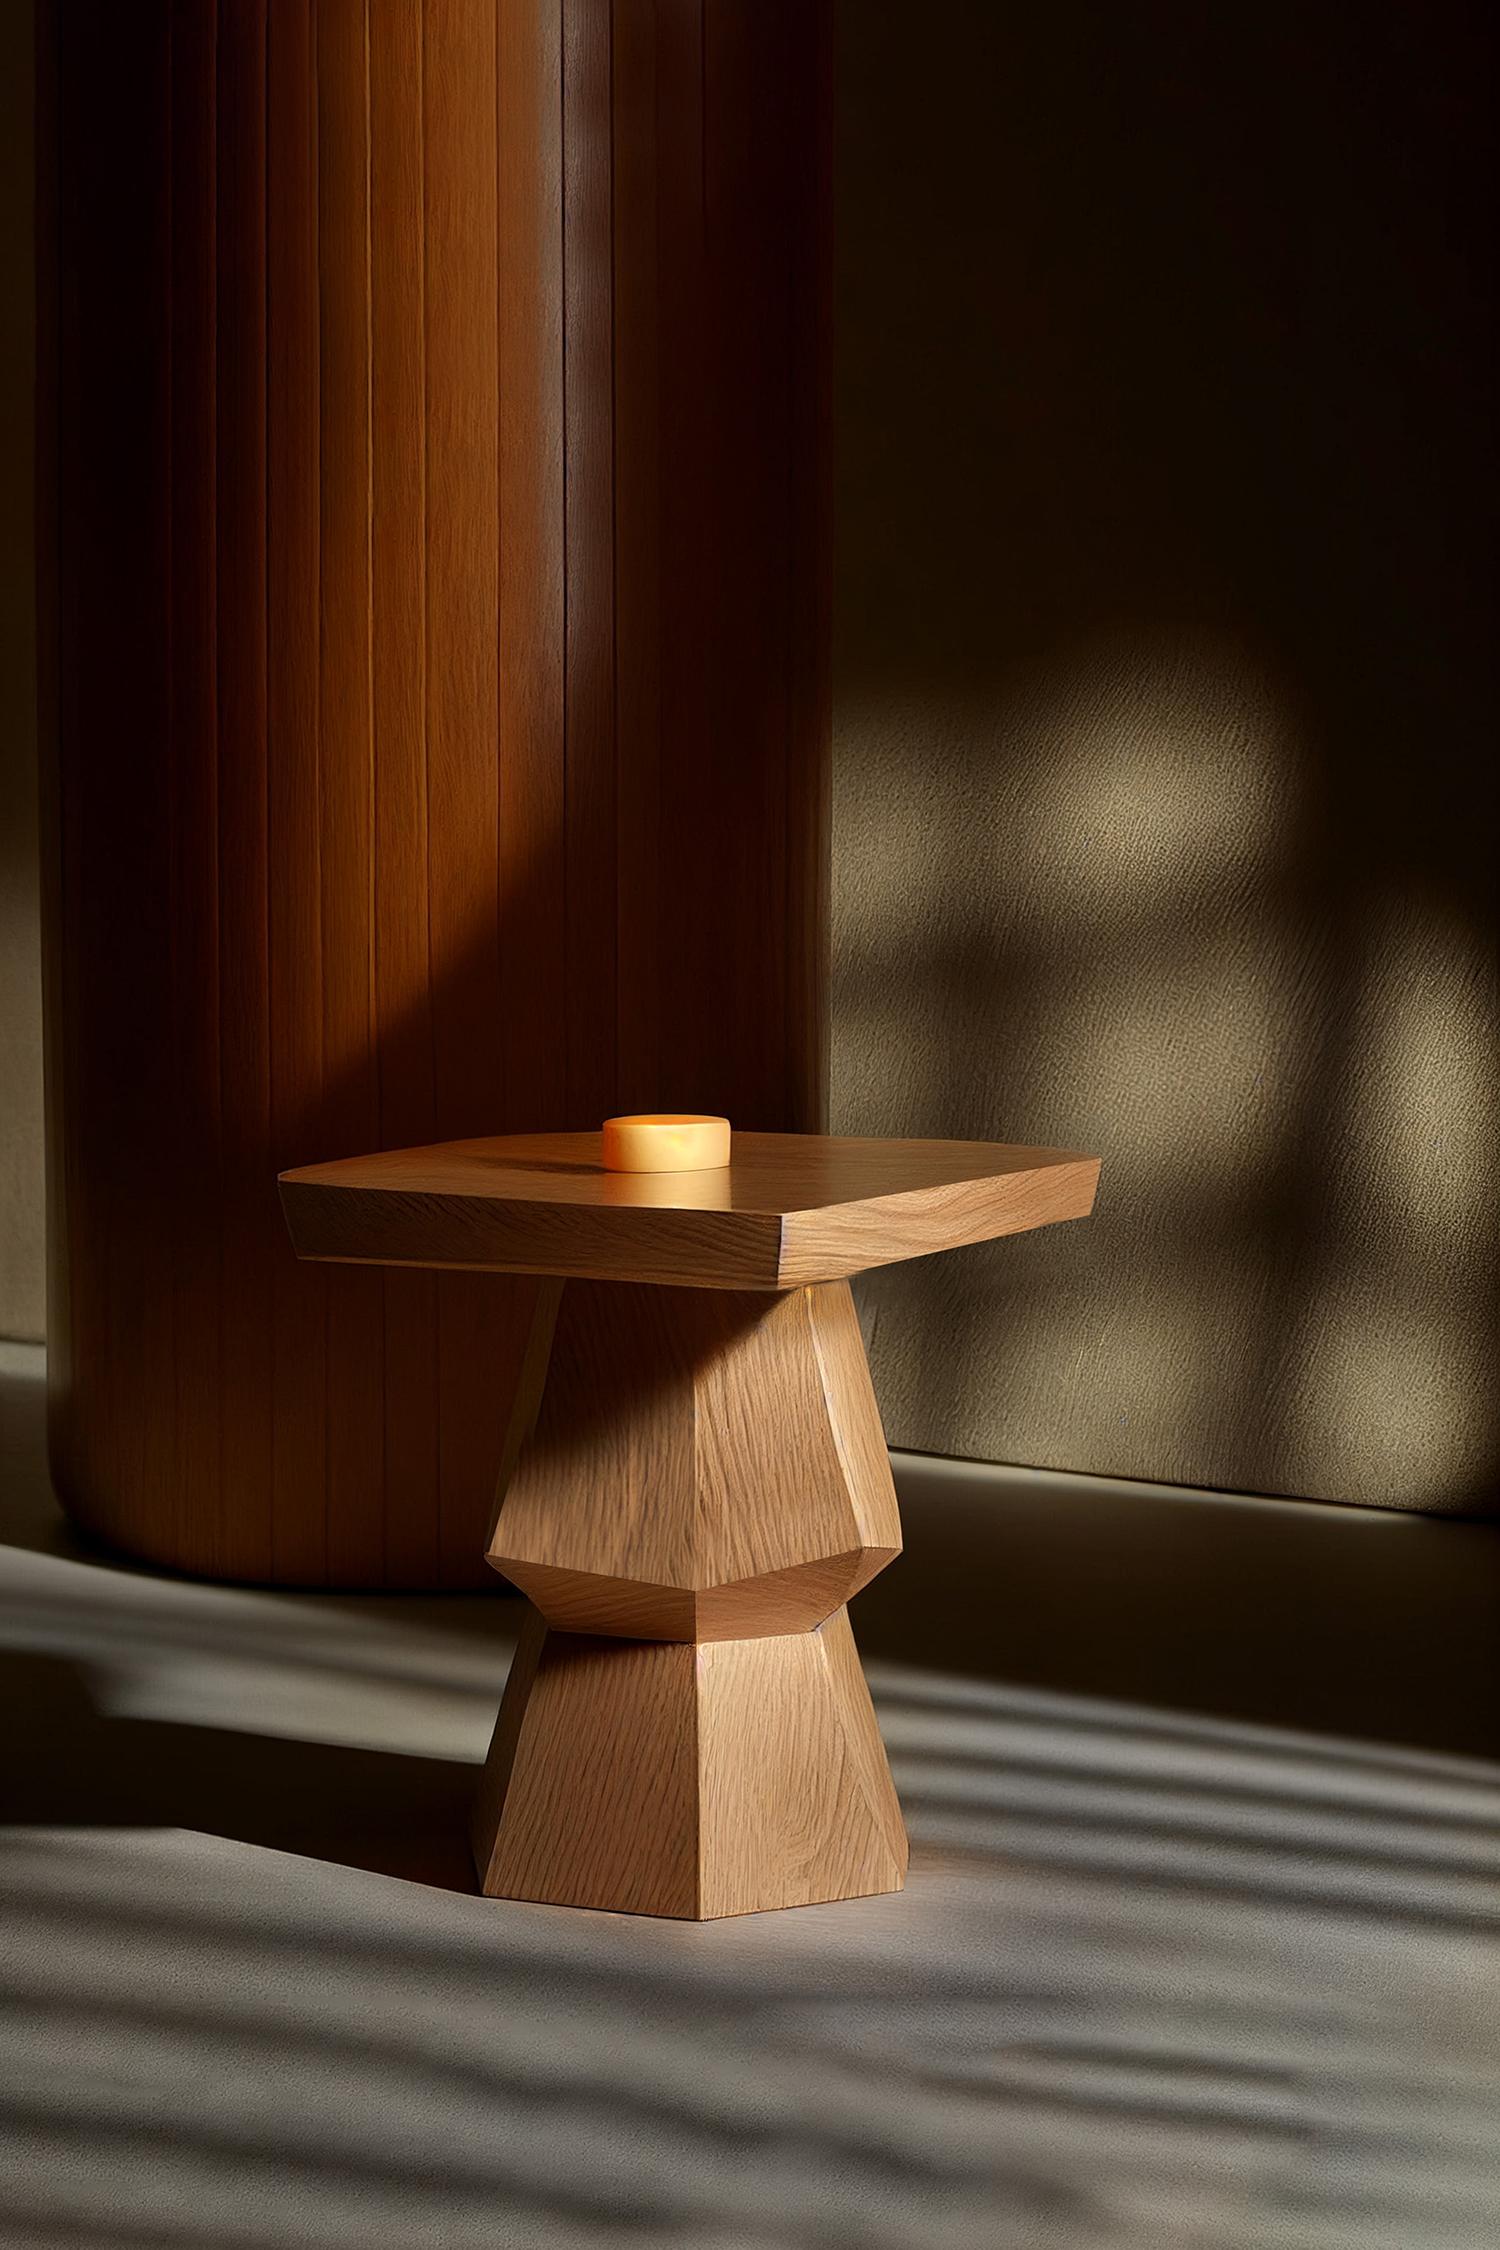 Socle 3 Side Table, Auxiliary Table, Night Stand 

Socle is a small solid wood table designed by the NONO design team. Made of solid wood, its elaborated construction serves as a support, much like a plinth for a statue or sculpture.

In the past,